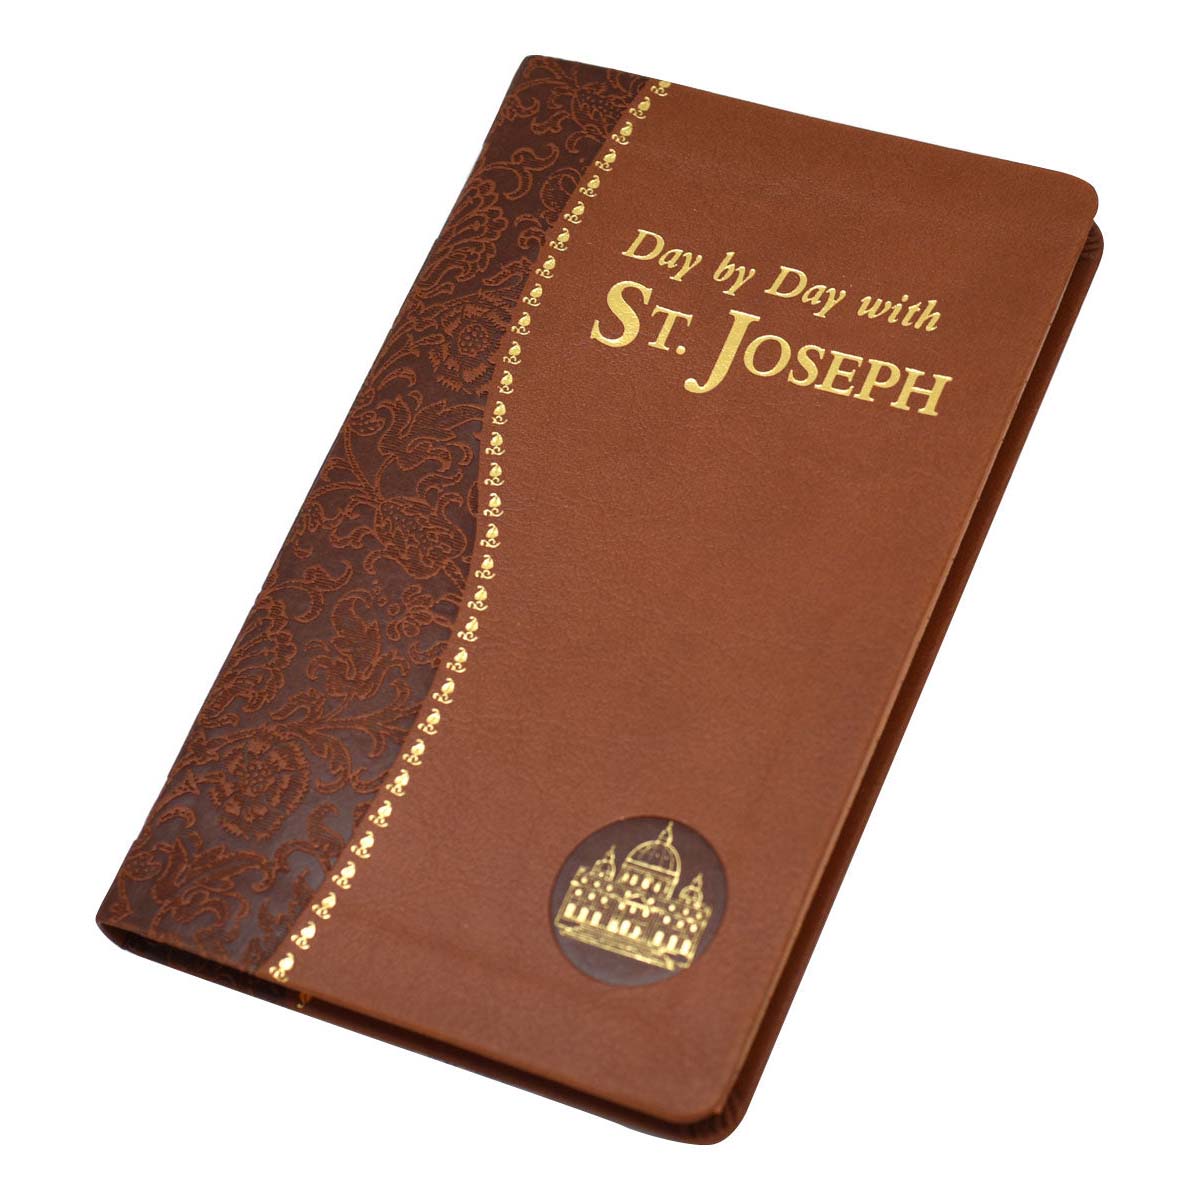 Day By Day with St. Joseph Book - Custom Council